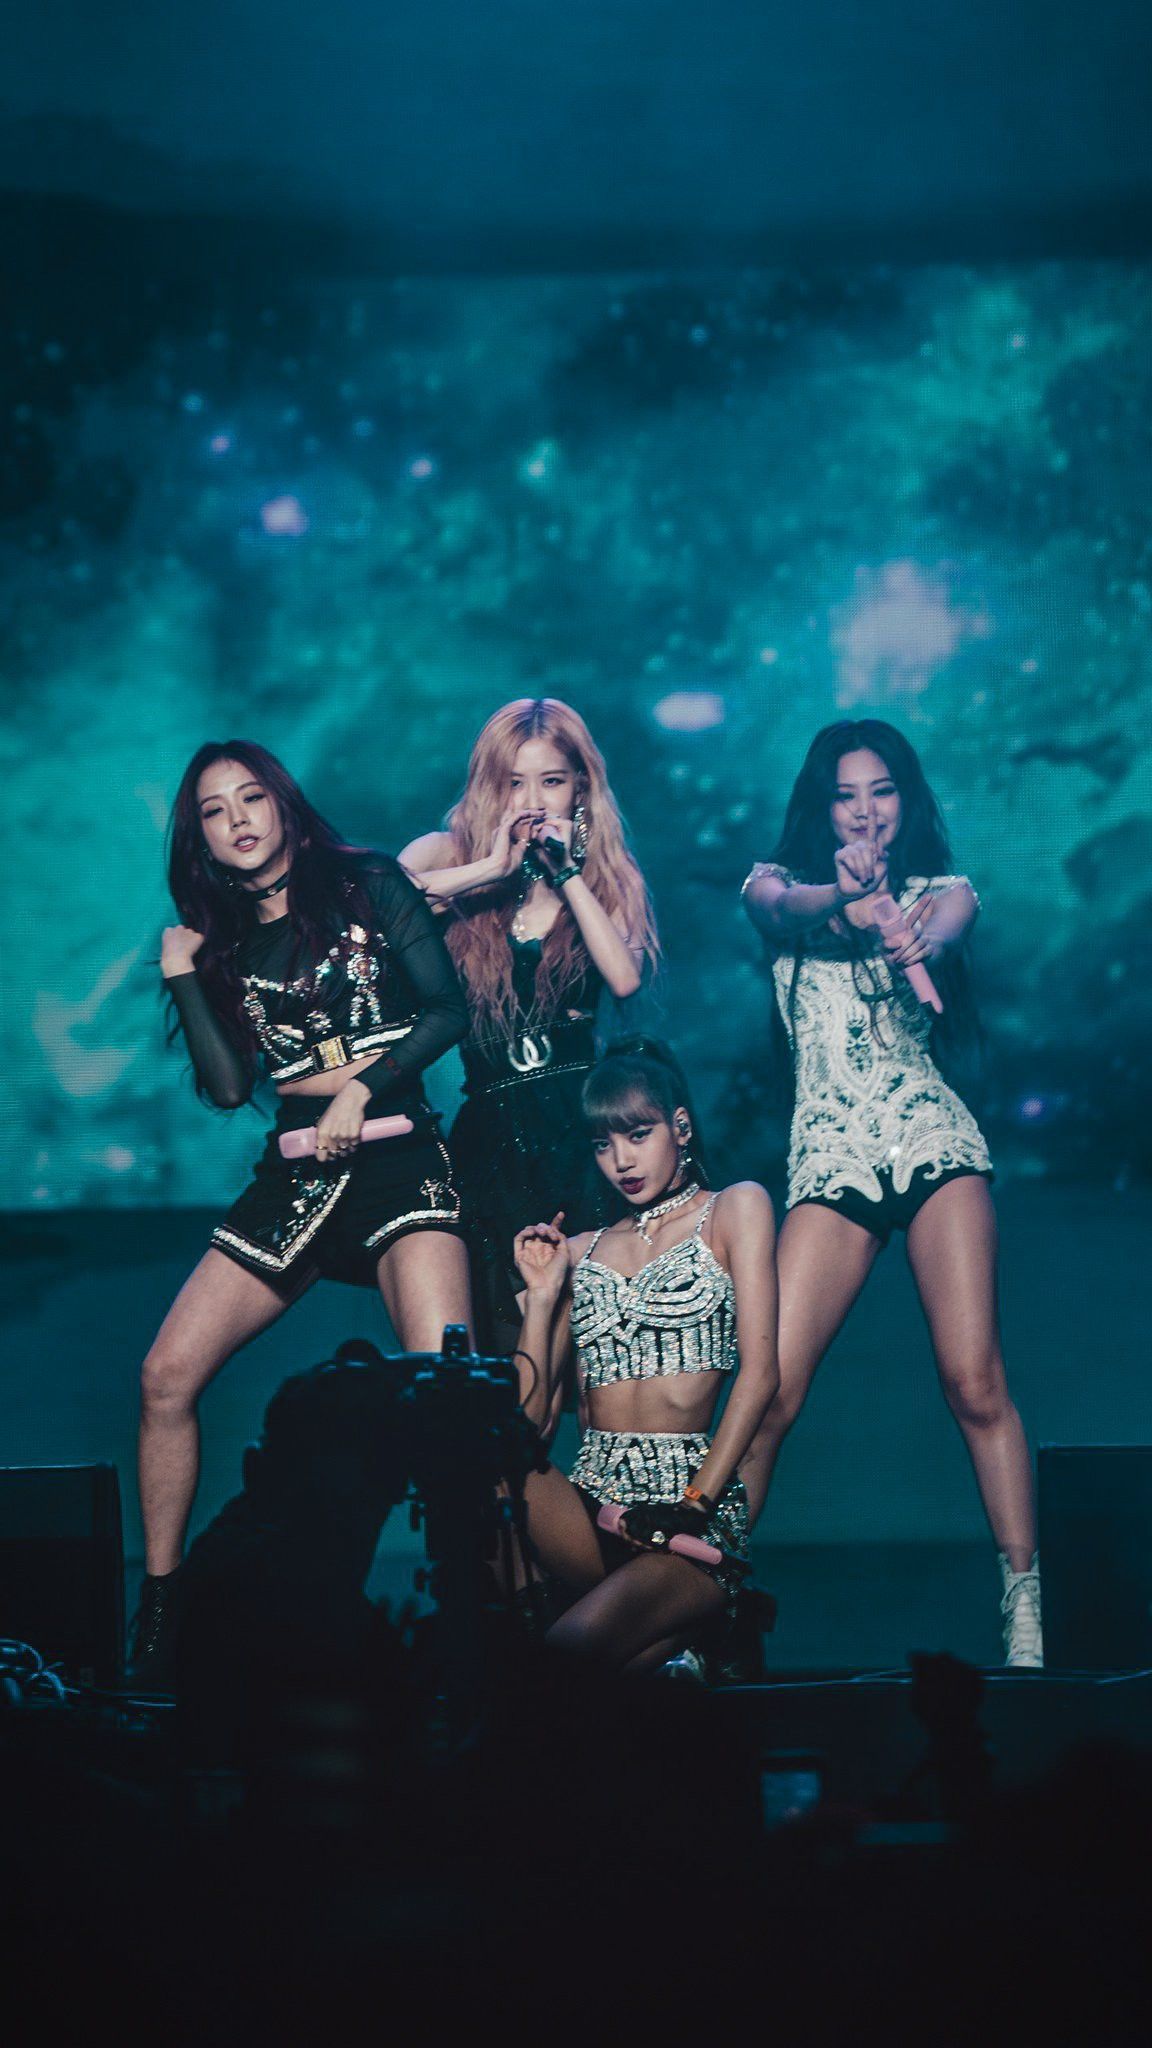 NEWS BLACKPINK break own records on UK iTunes chart with 'Sour Candy'